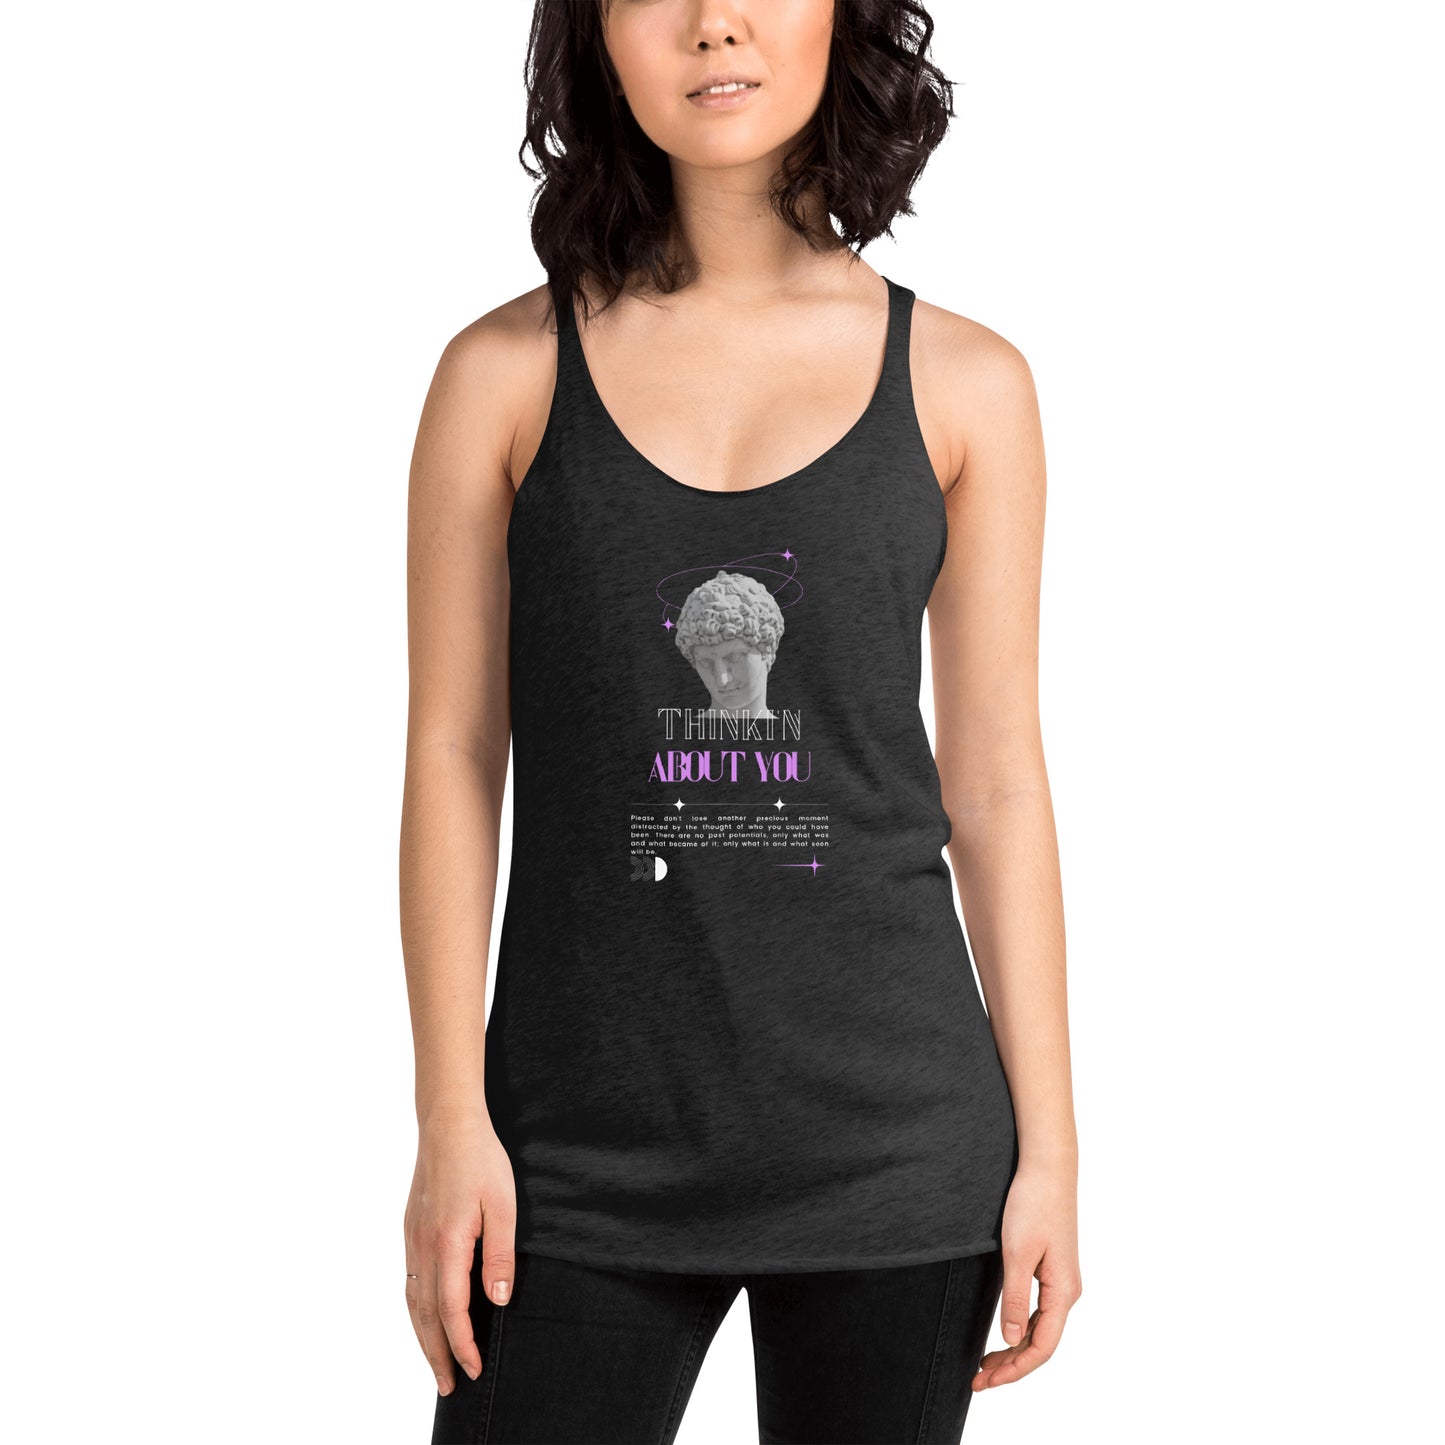 Mindfully Thinki'n About You Women's Racerback Tank